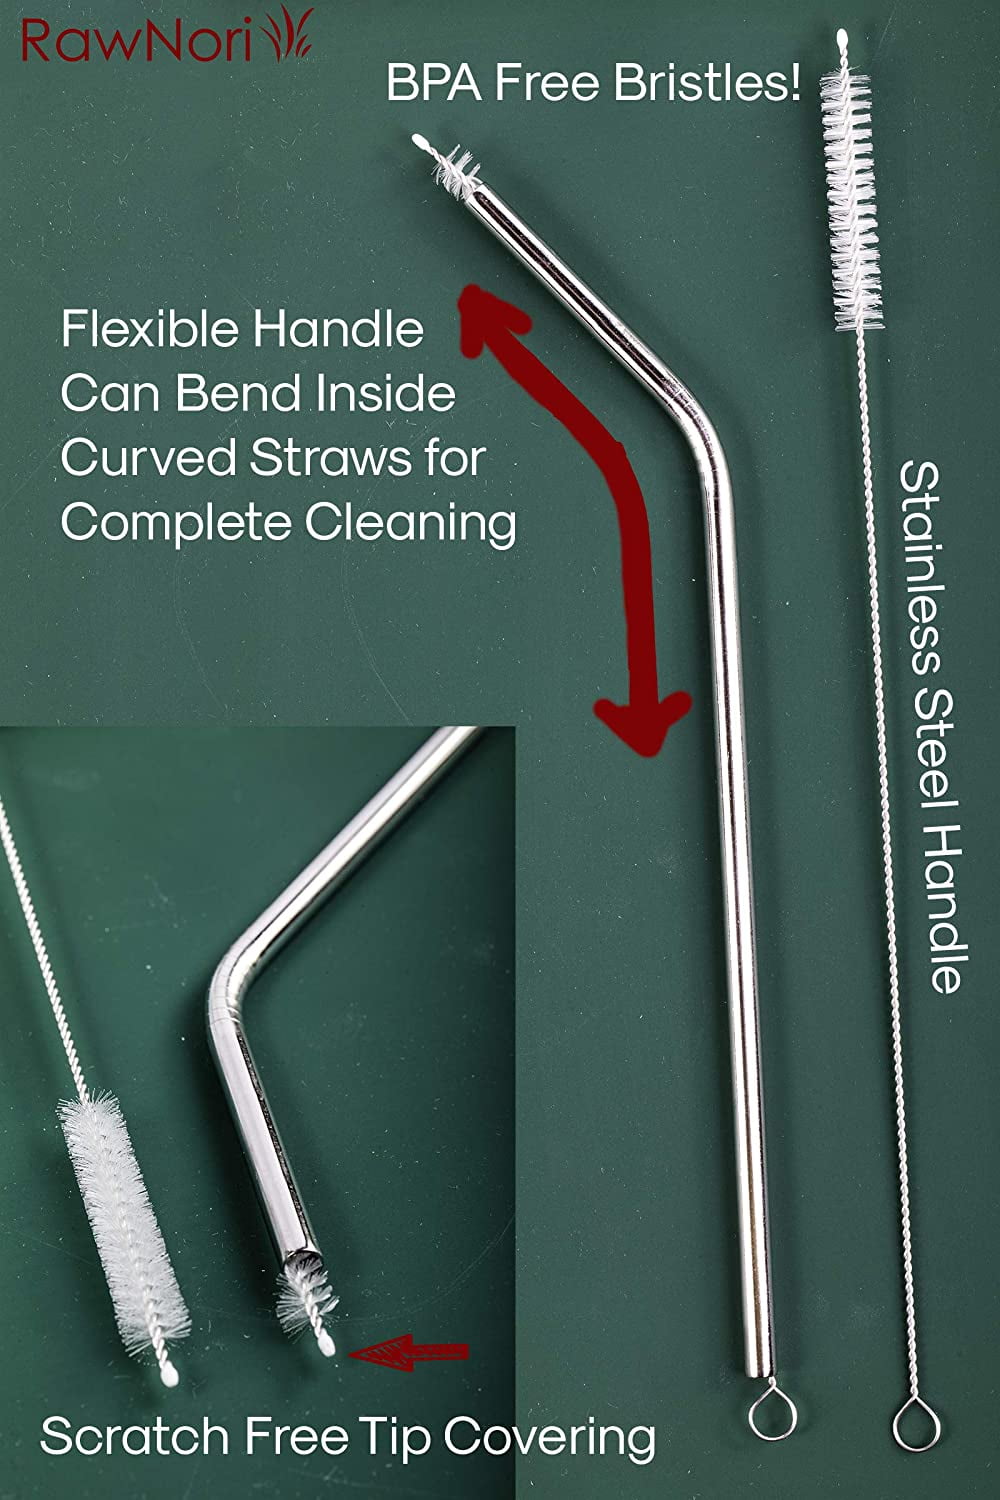 2-Liter metal straw with air stone & cleaning brush